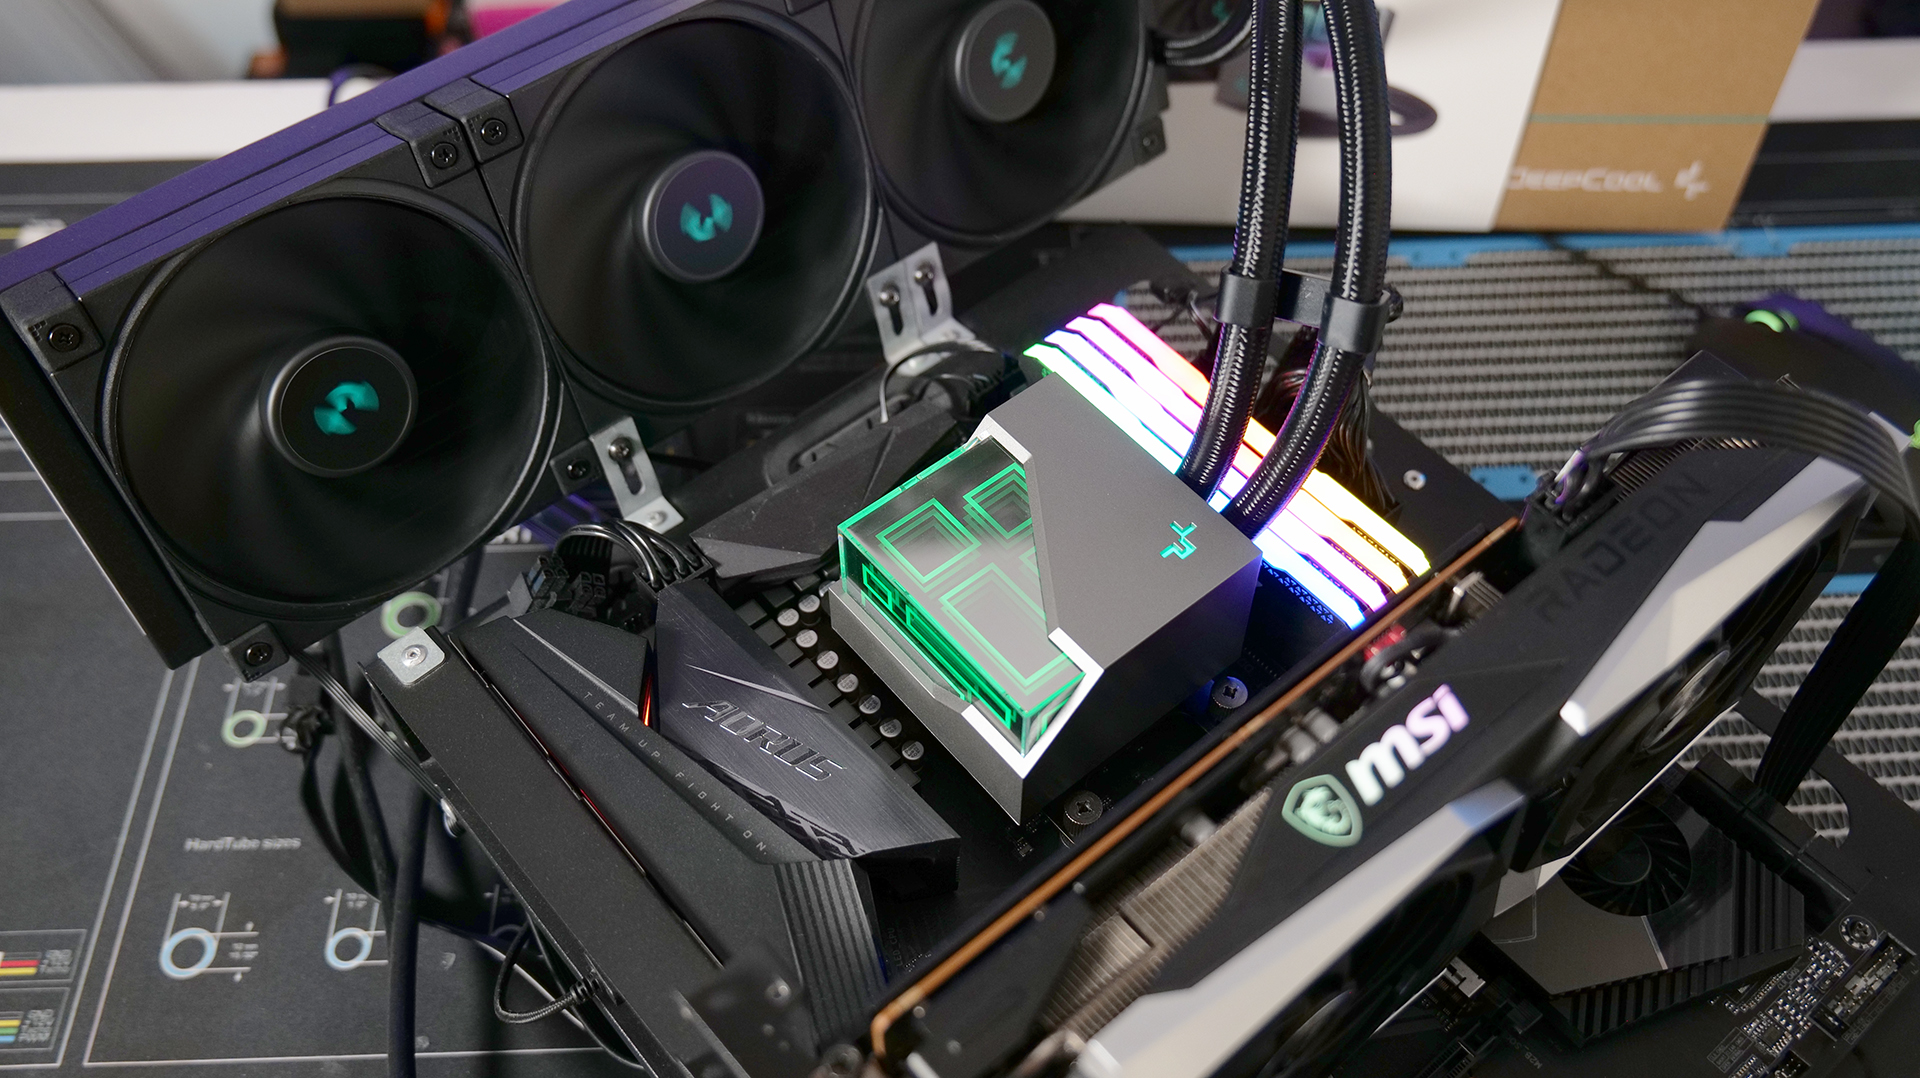 DeepCool LS720 review: A 360 mm AIO with RGB, but without cable